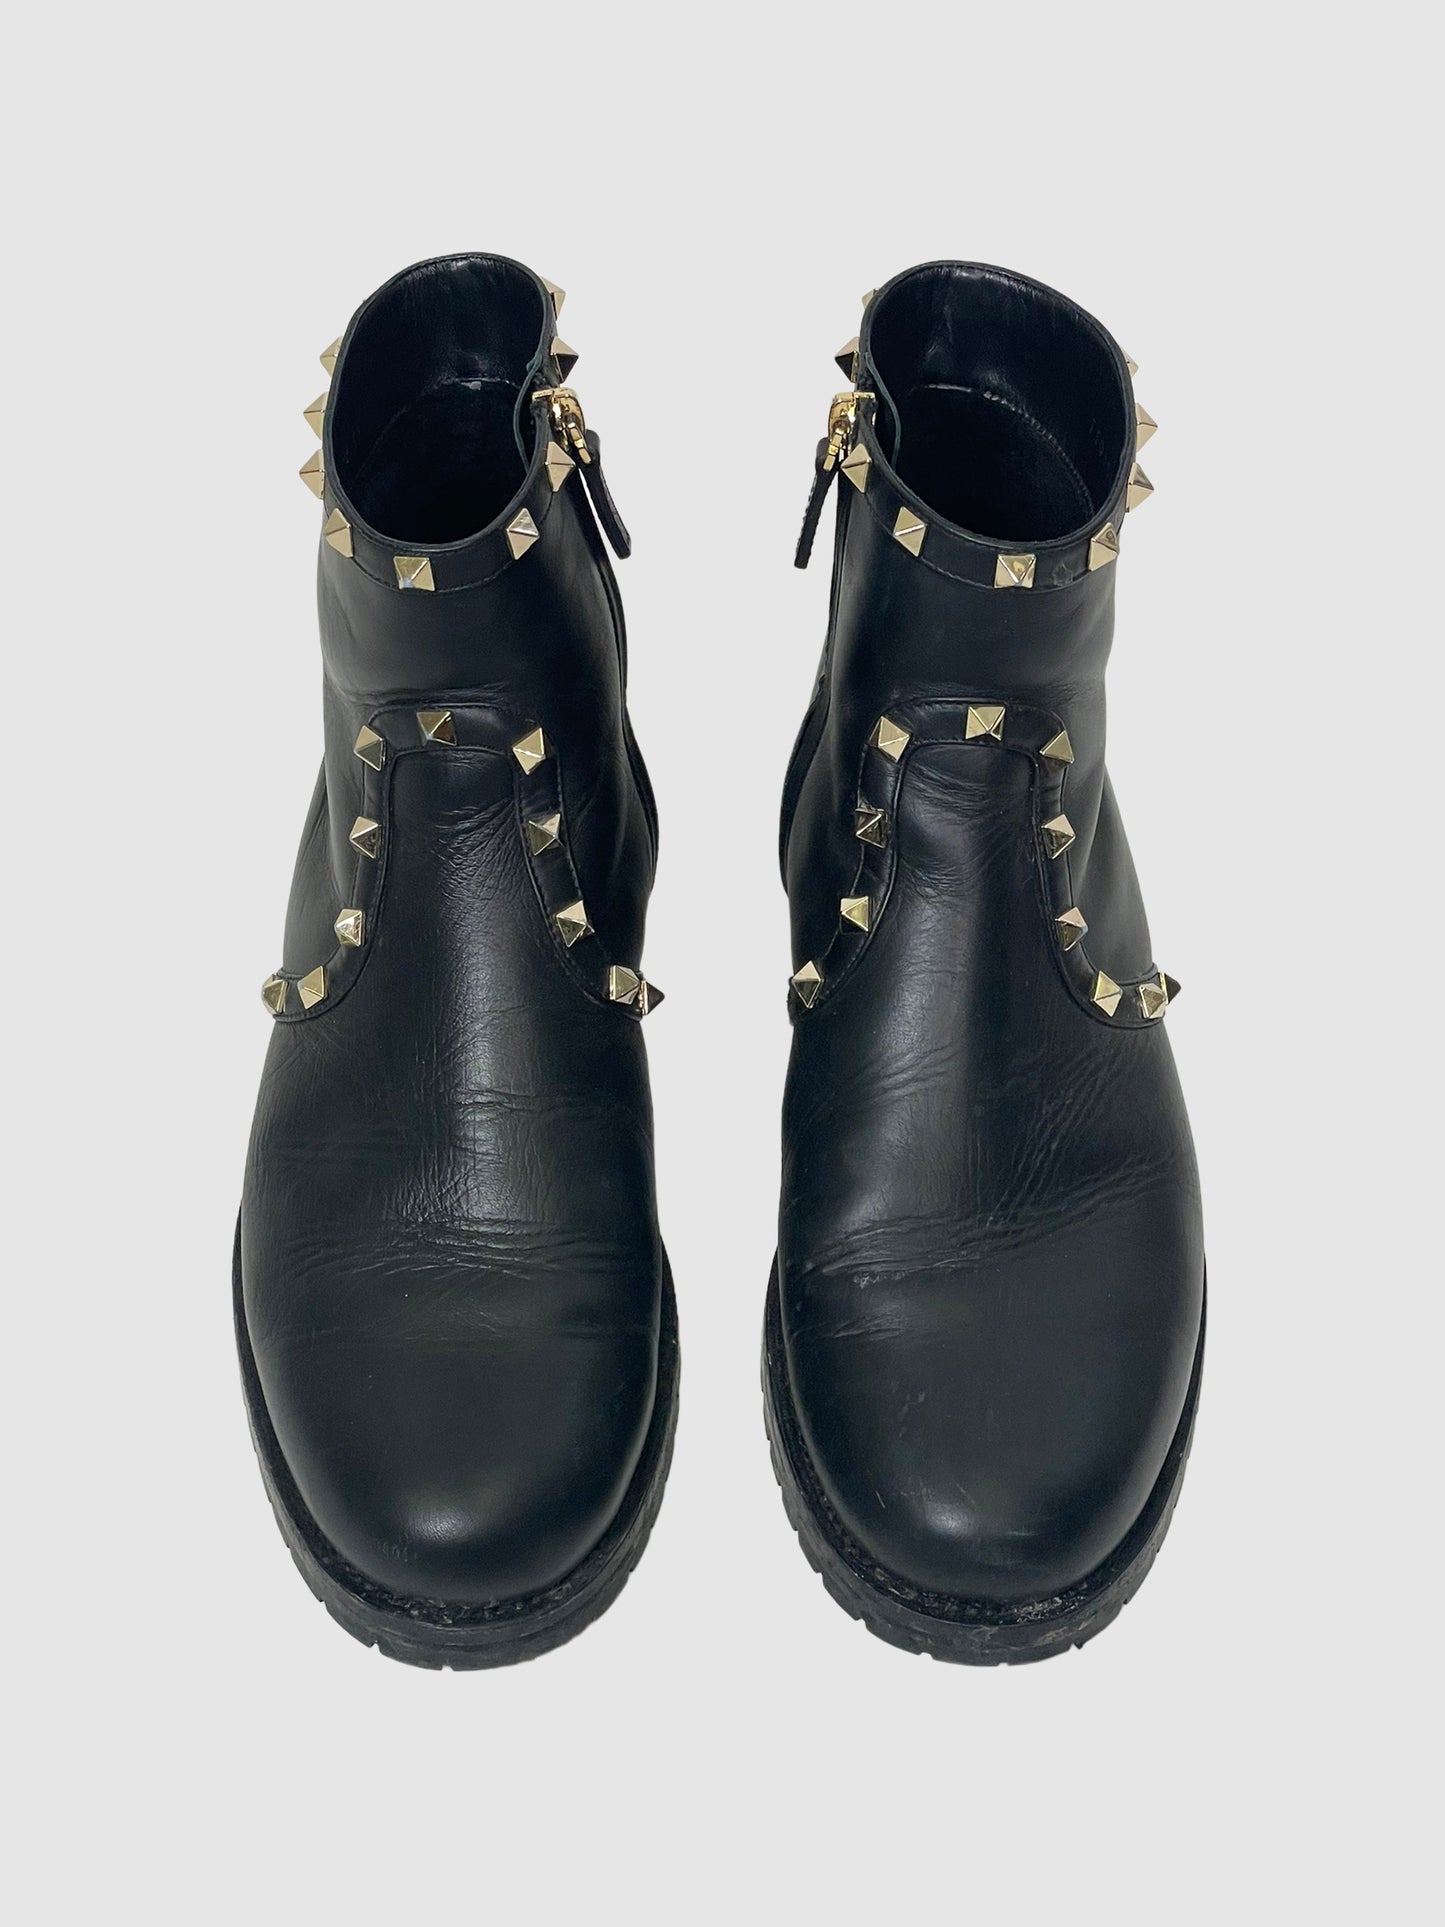 Valentino Ankle Boots with Studs - Size 39